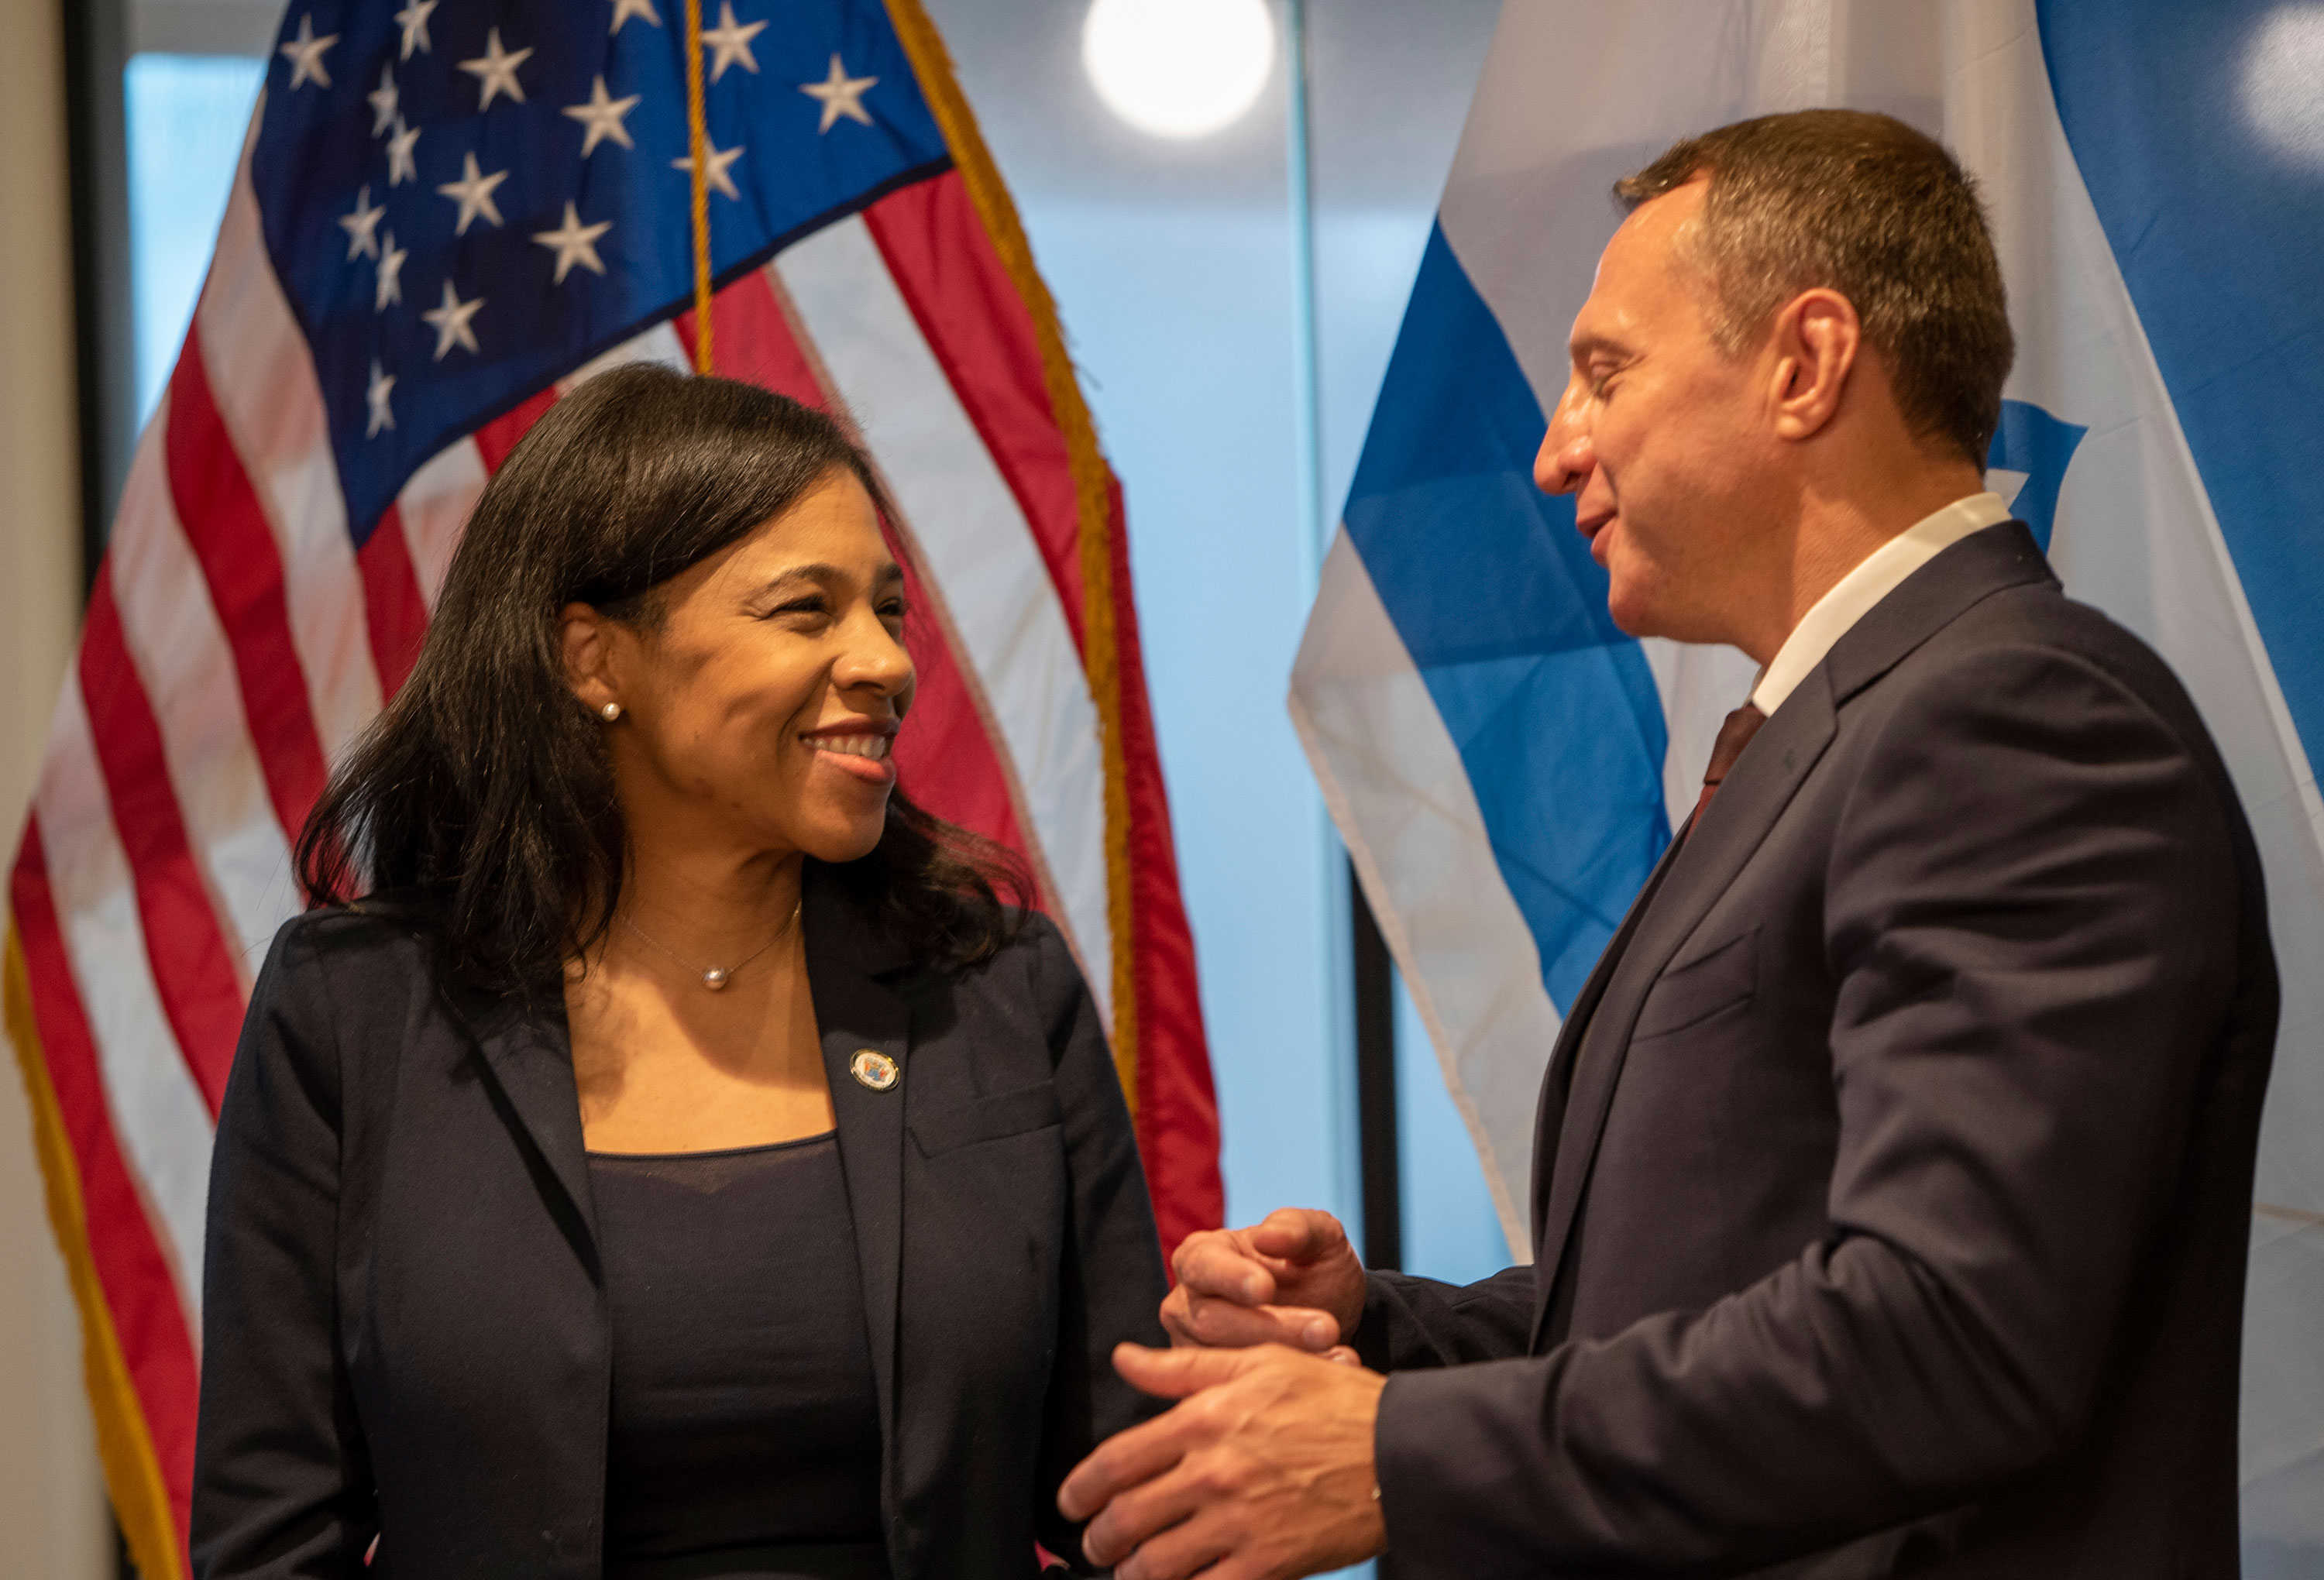 Acting Secretary of State Way and Israeli Minister of Tourism Yoel Razvozov Held a Bilateral Meeting with the Goal of Enhancing New Jersey-Israel Travel